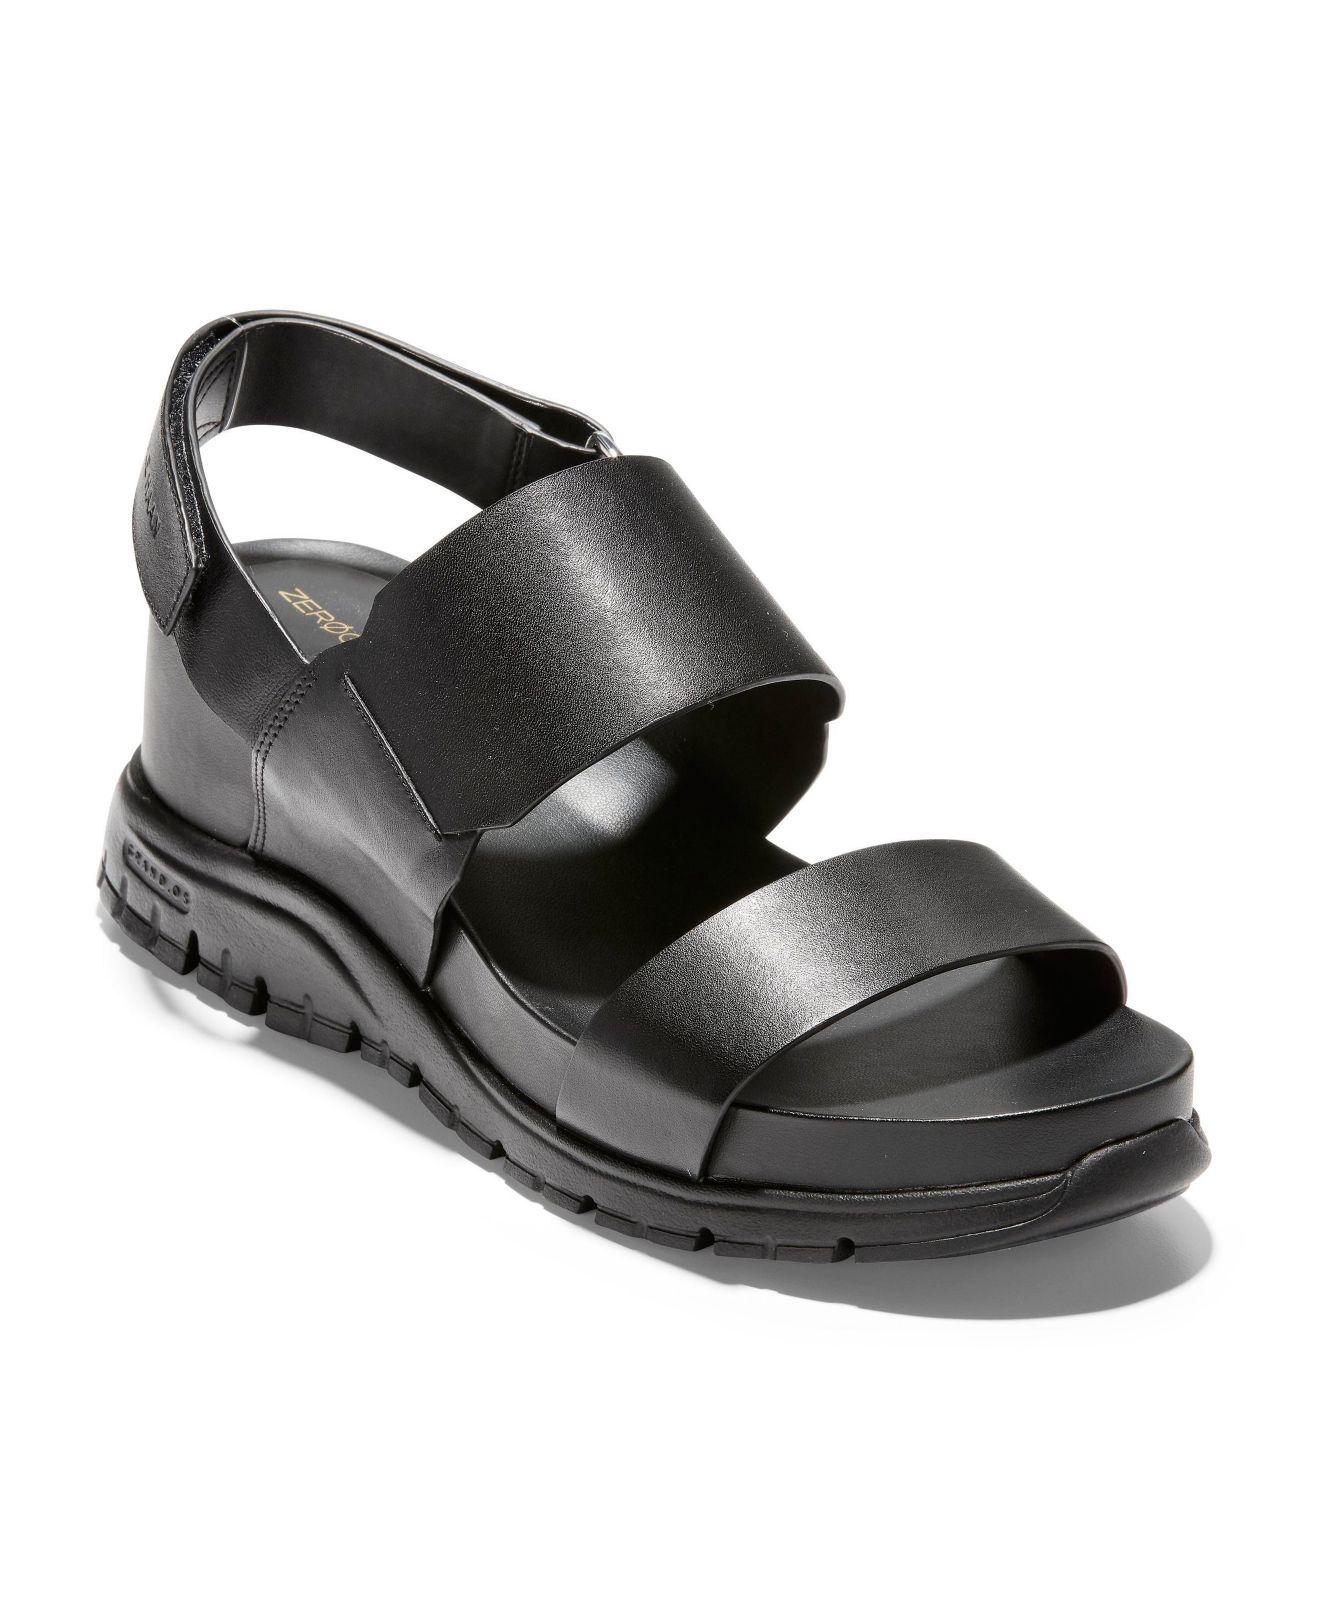 Cole Haan Leather Zerogrand Wedge Sandals in Black Leather/Black (Black) |  Lyst